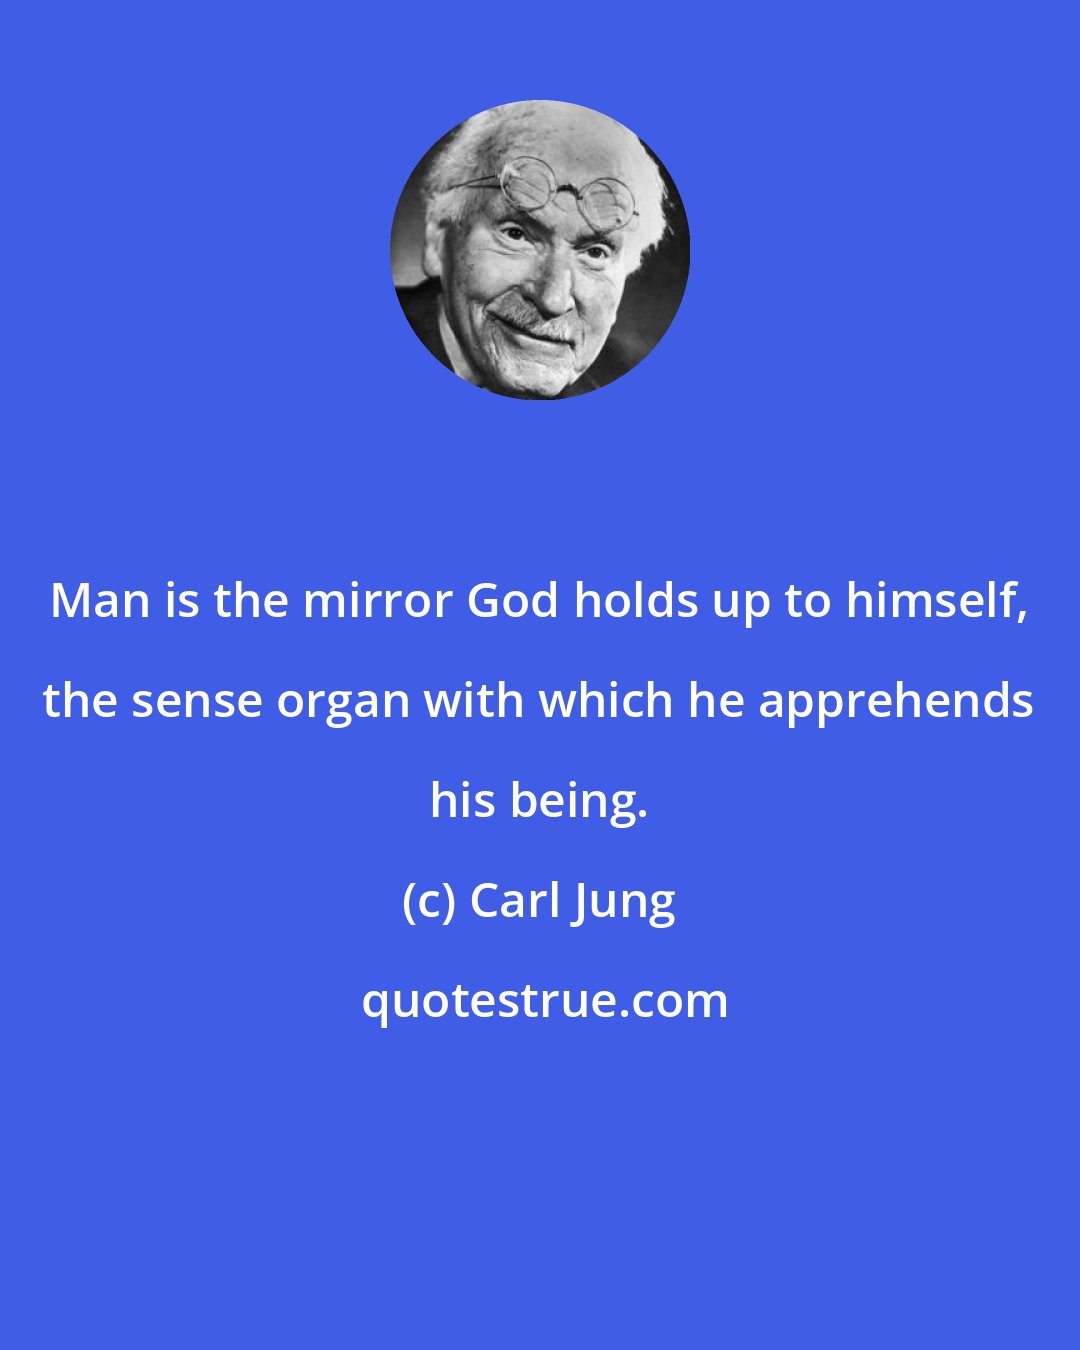 Carl Jung: Man is the mirror God holds up to himself, the sense organ with which he apprehends his being.